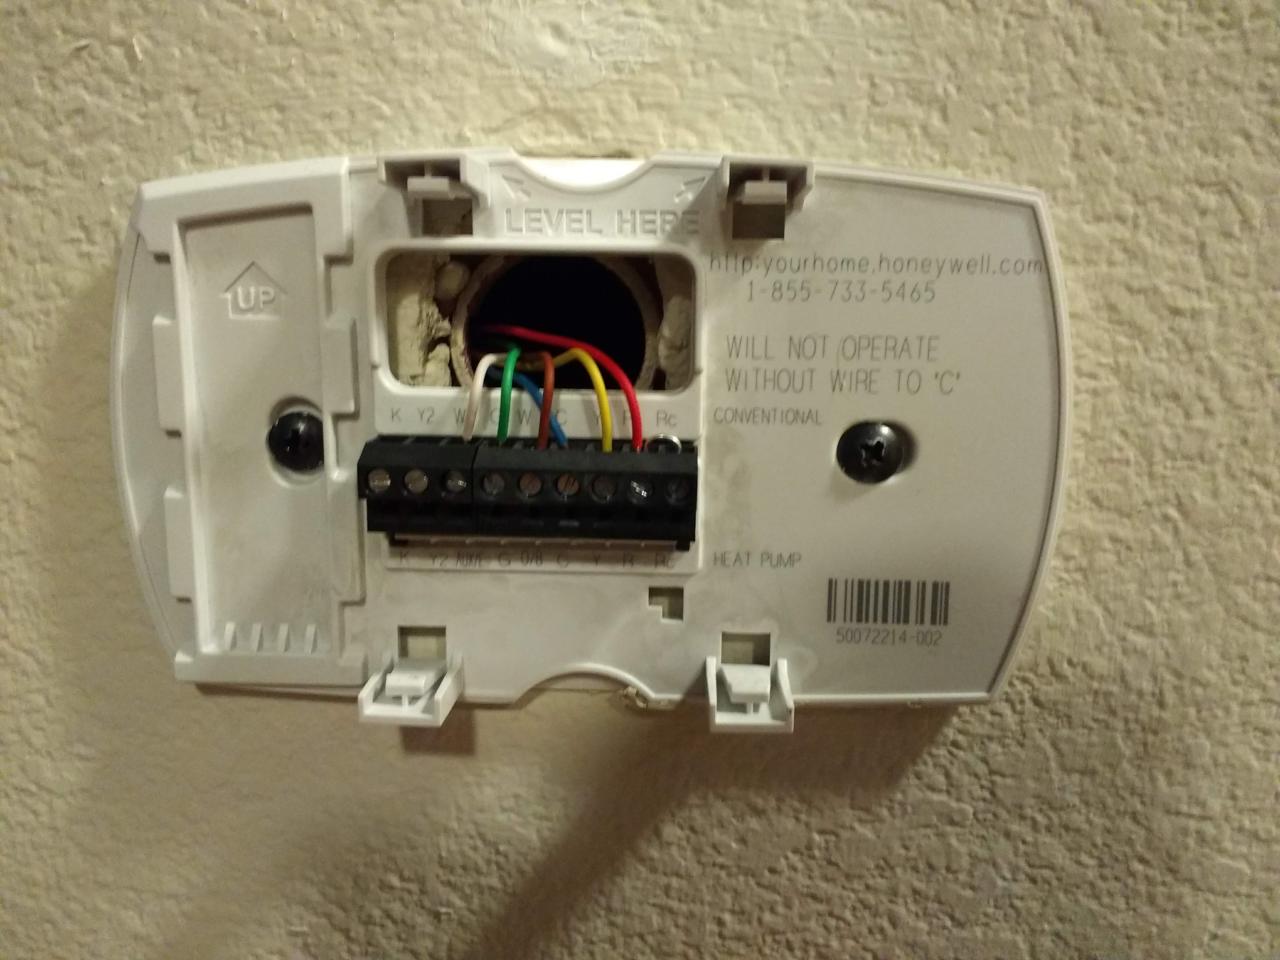 hvac Identify furance/cooling system from wiring? Home Improvement